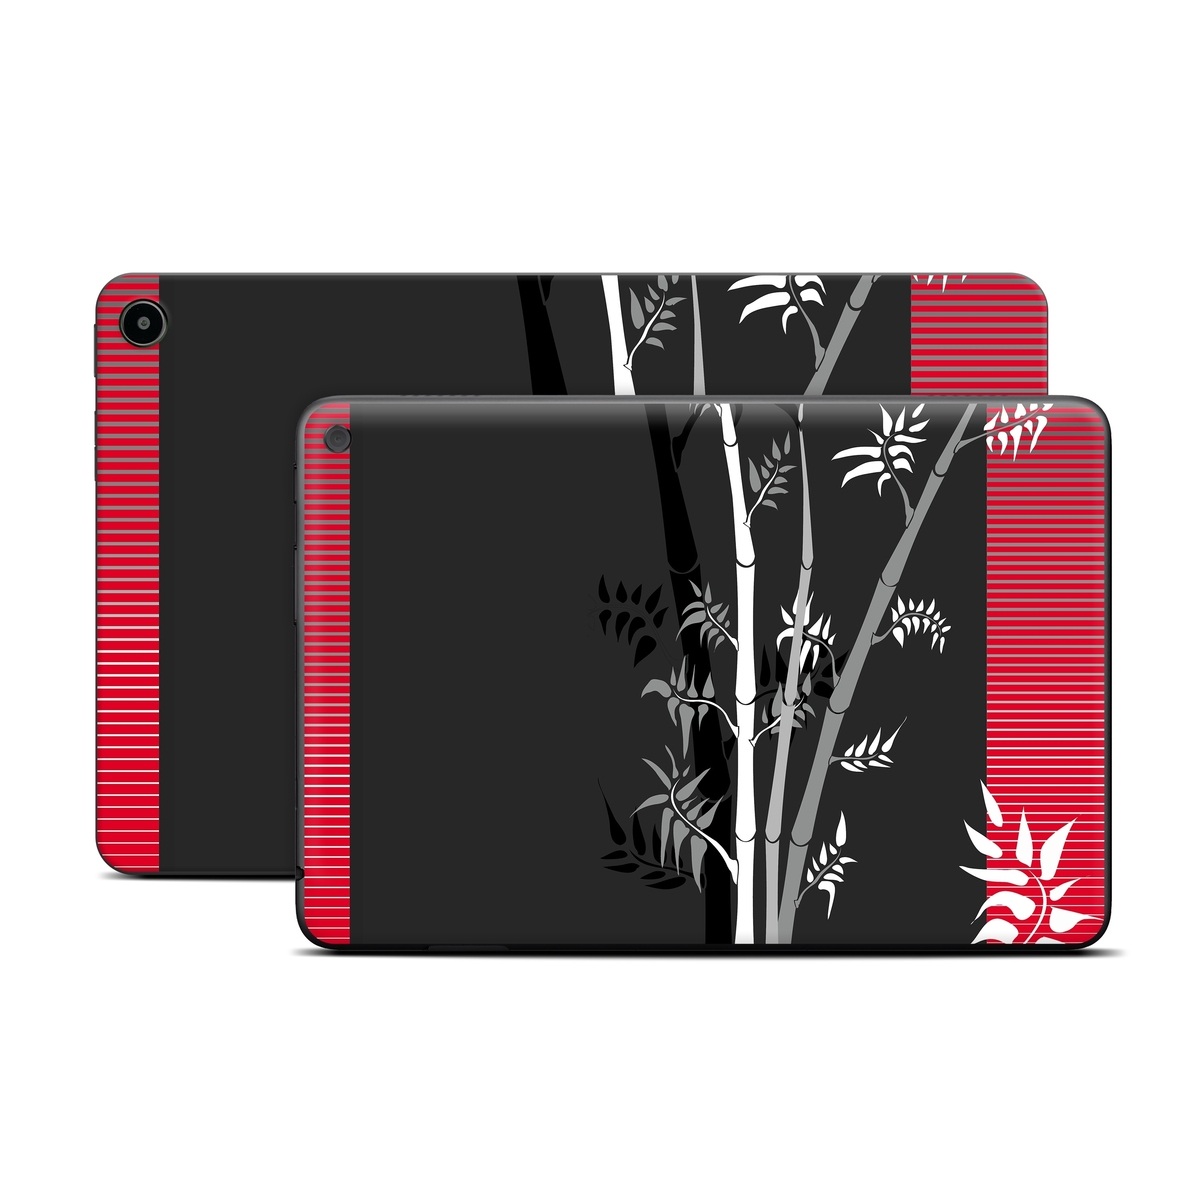 Amazon Fire Tablet Series Skin Skin design of Tree, Branch, Plant, Graphic design, Bamboo, Illustration, Plant stem, Black-and-white, with black, red, gray, white colors